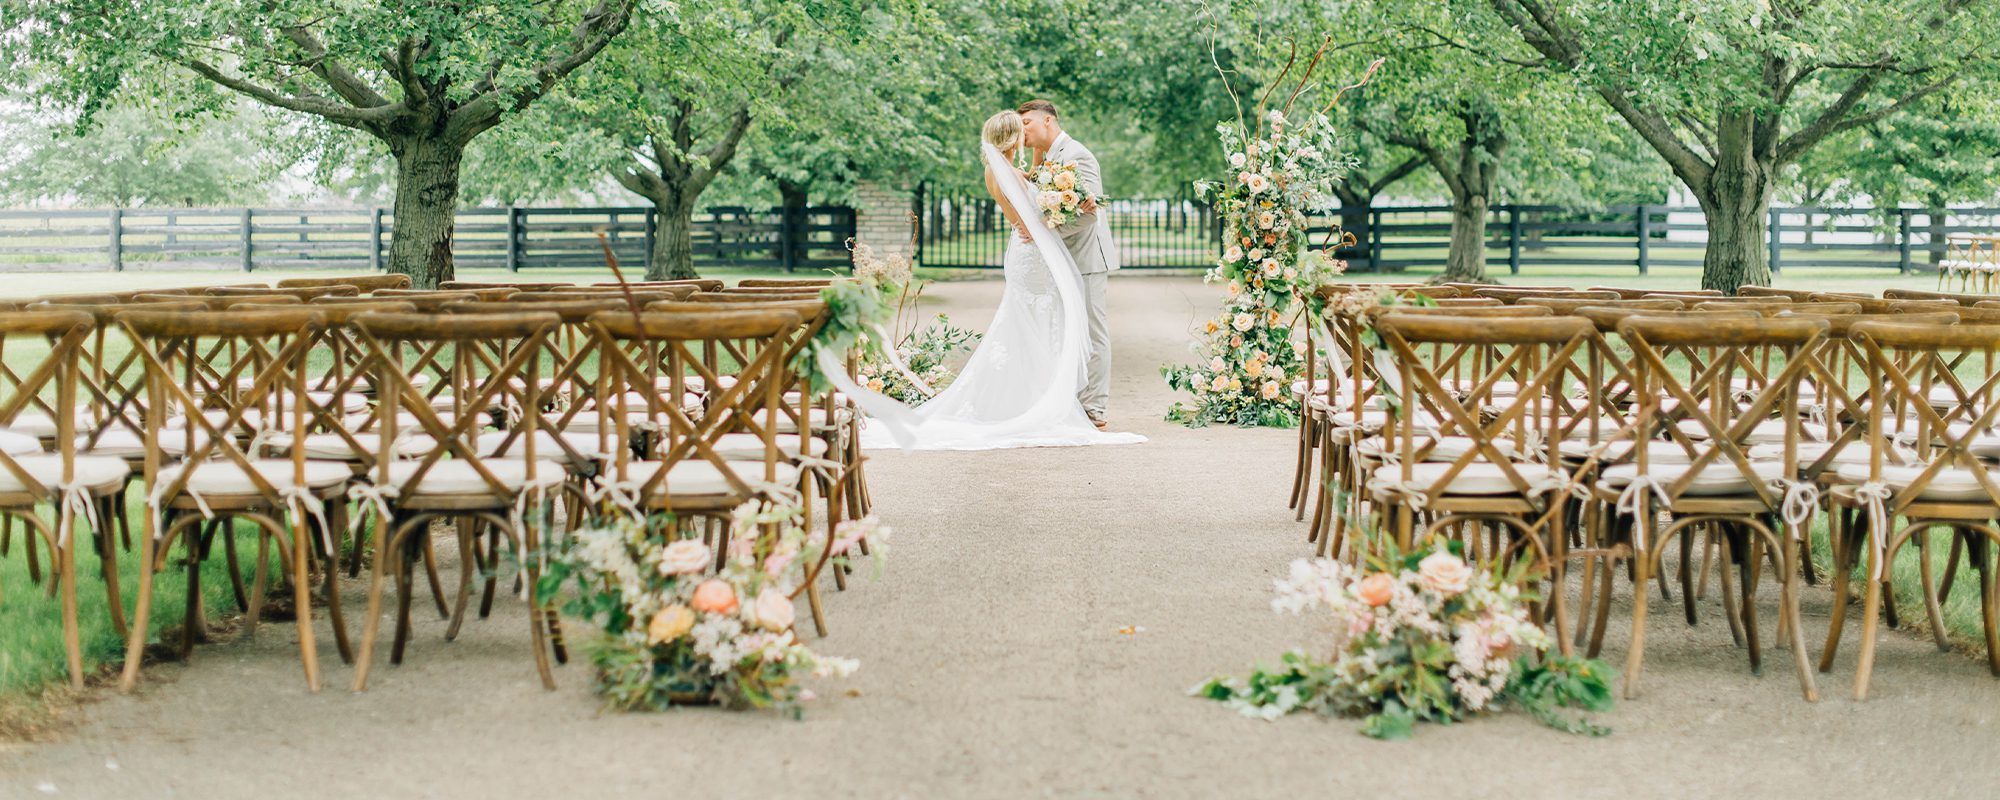 Weddings at Haven on the Farm | Peoria, IL